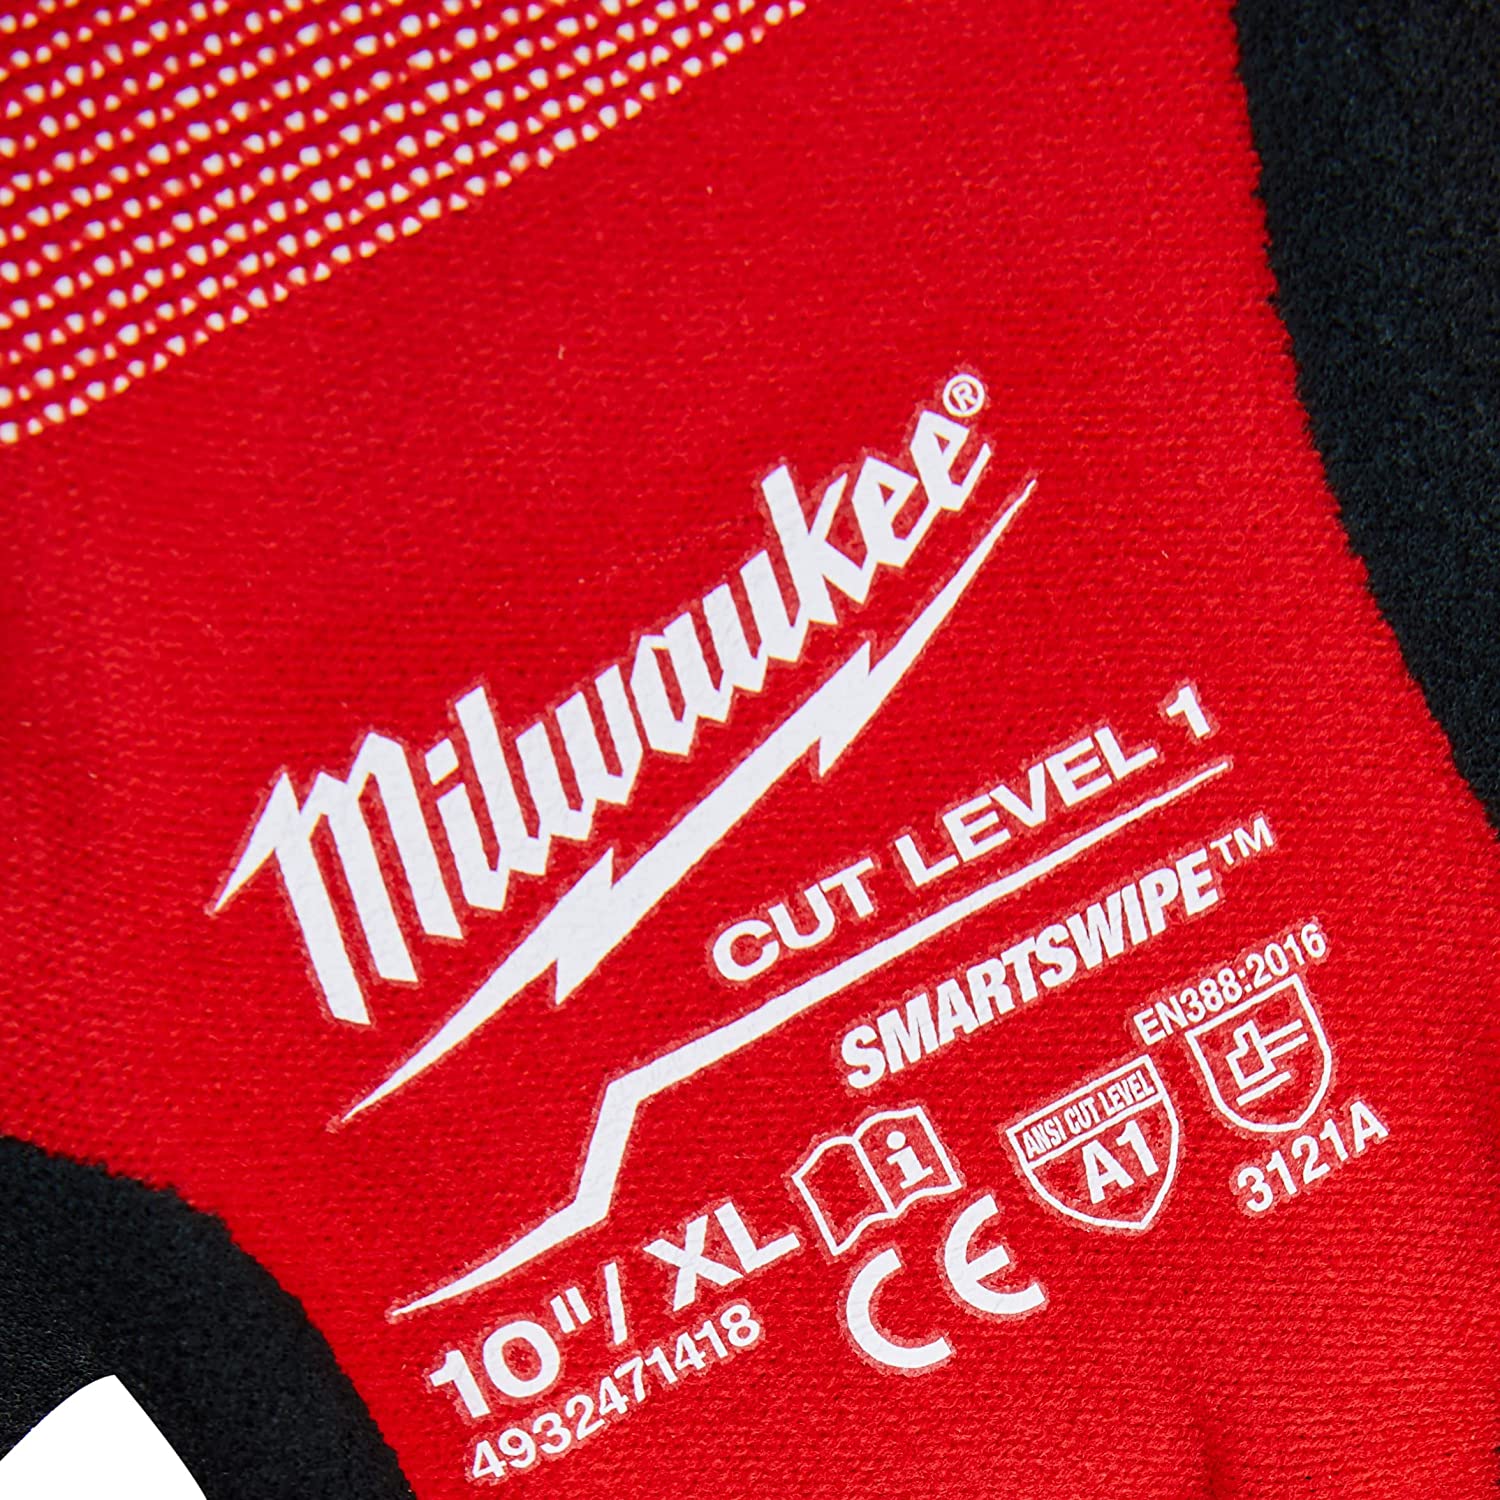 Milwaukee Cut-Resistant Dipped Gloves Cut Level 1 Size XL 4932471418